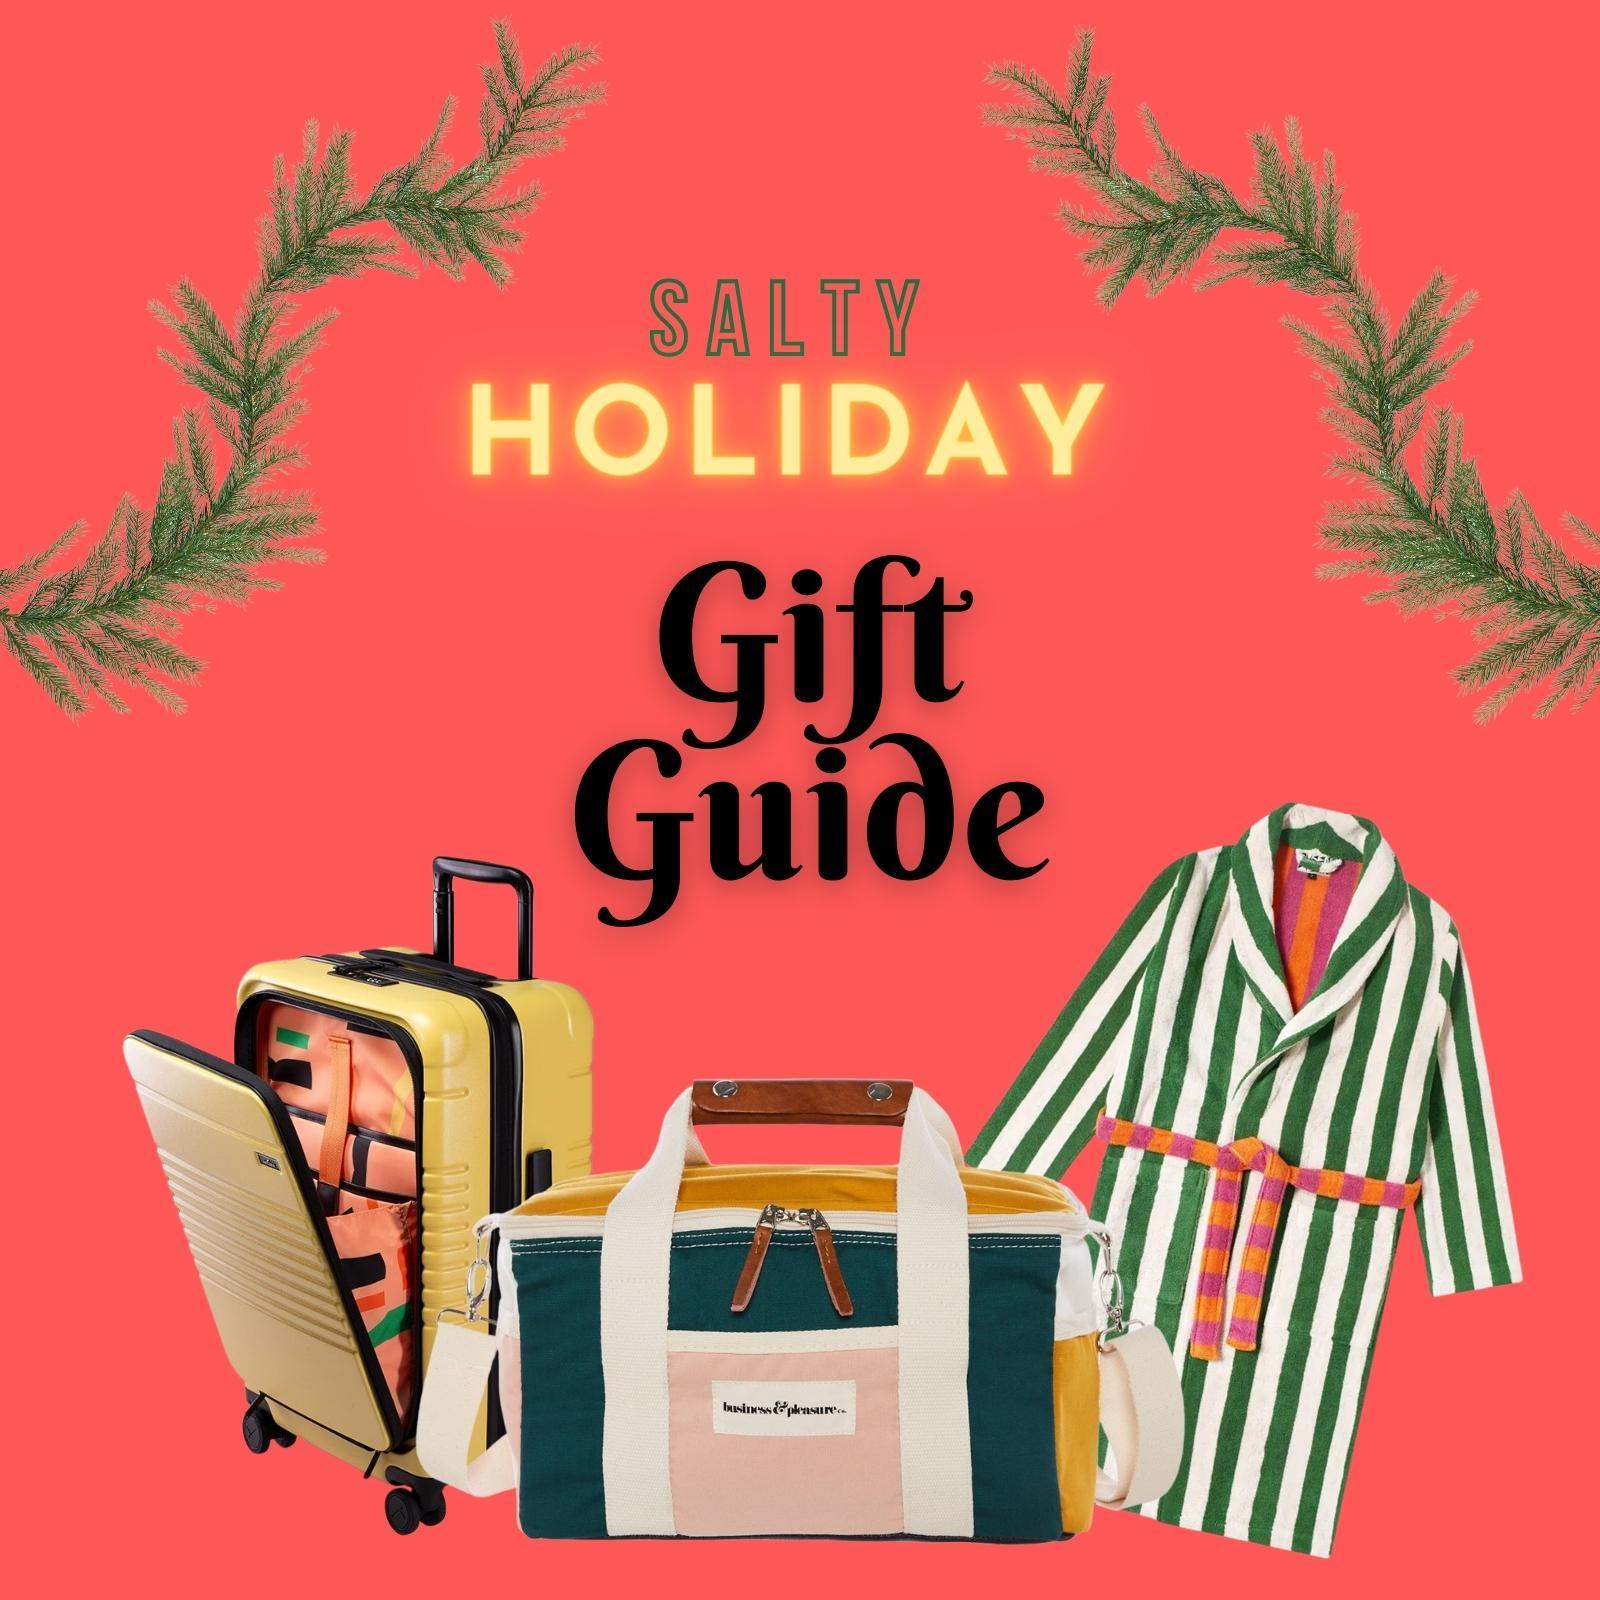 SALTY HOLIDAY GIFT GUIDE